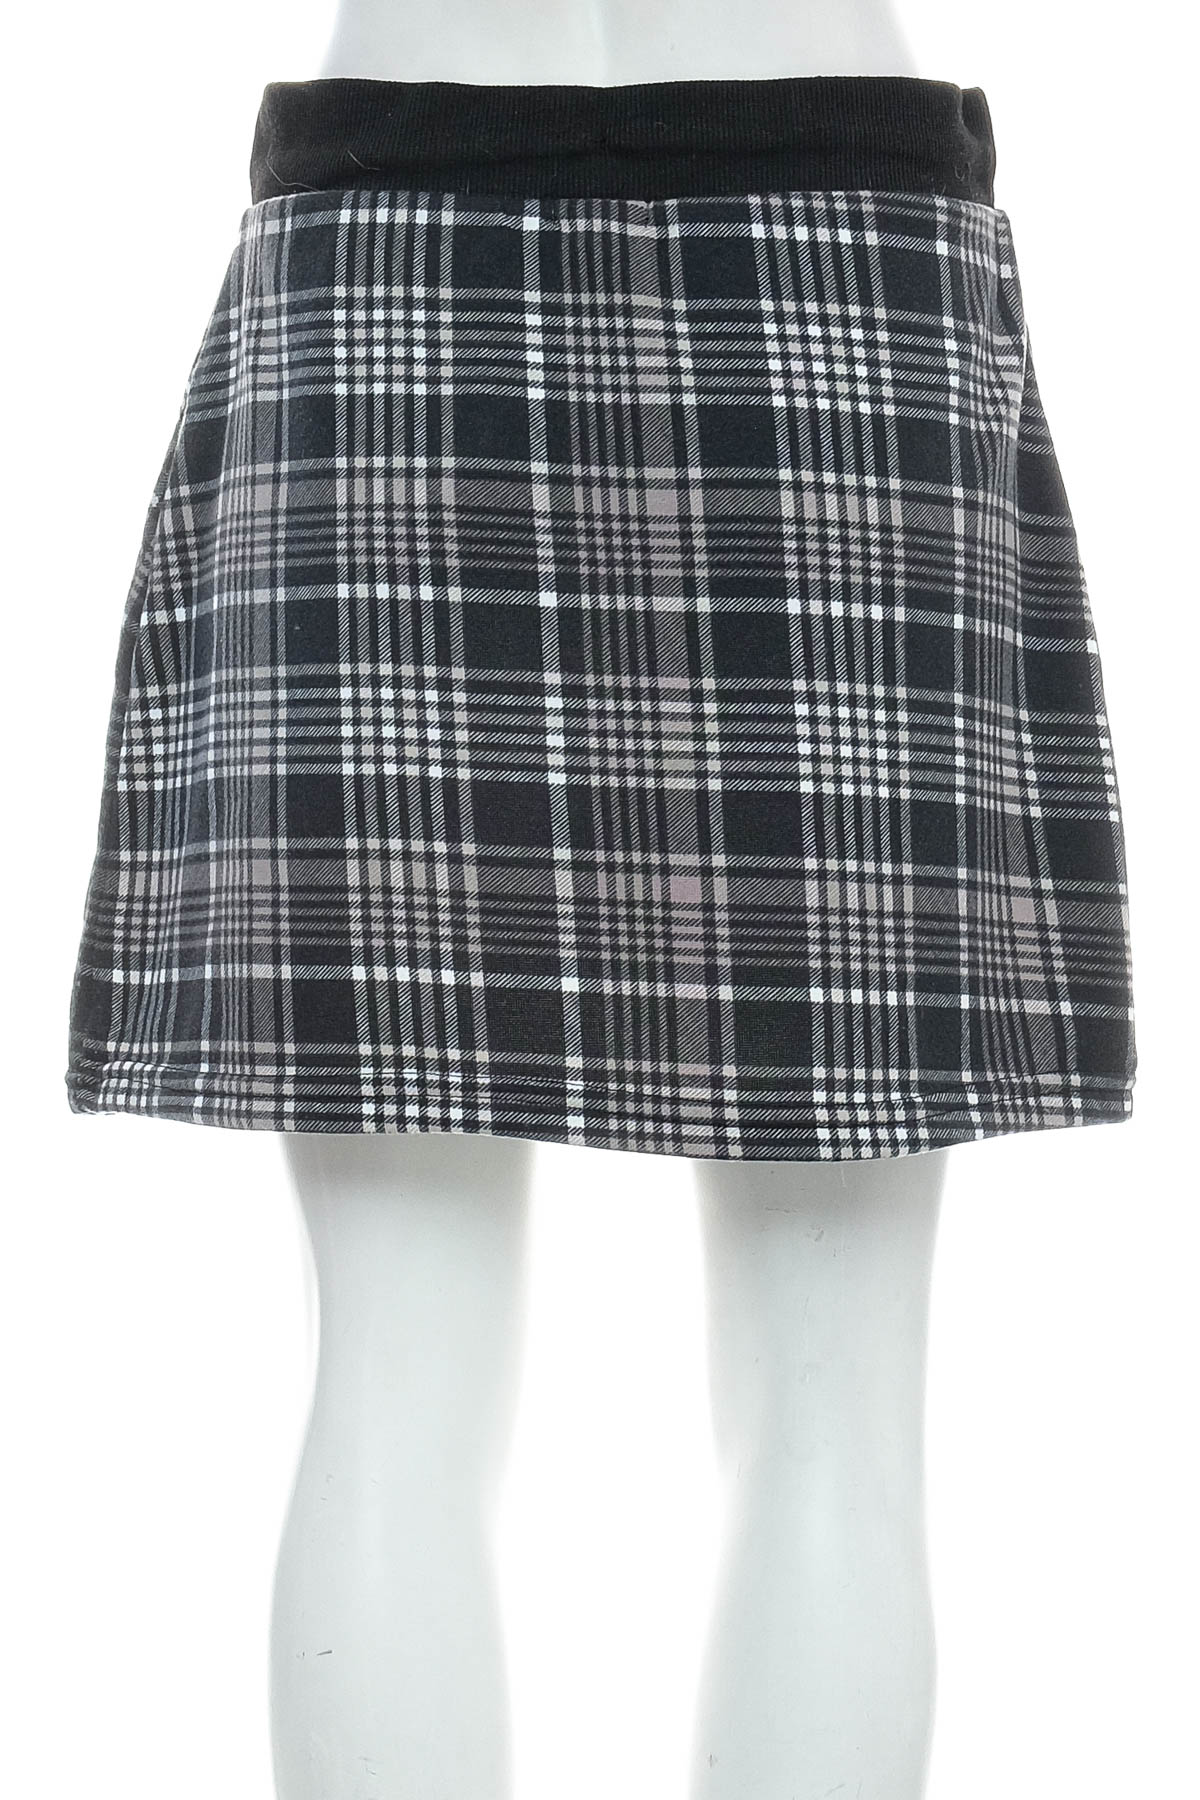 Skirt - J FOR JUSTIFY - 1